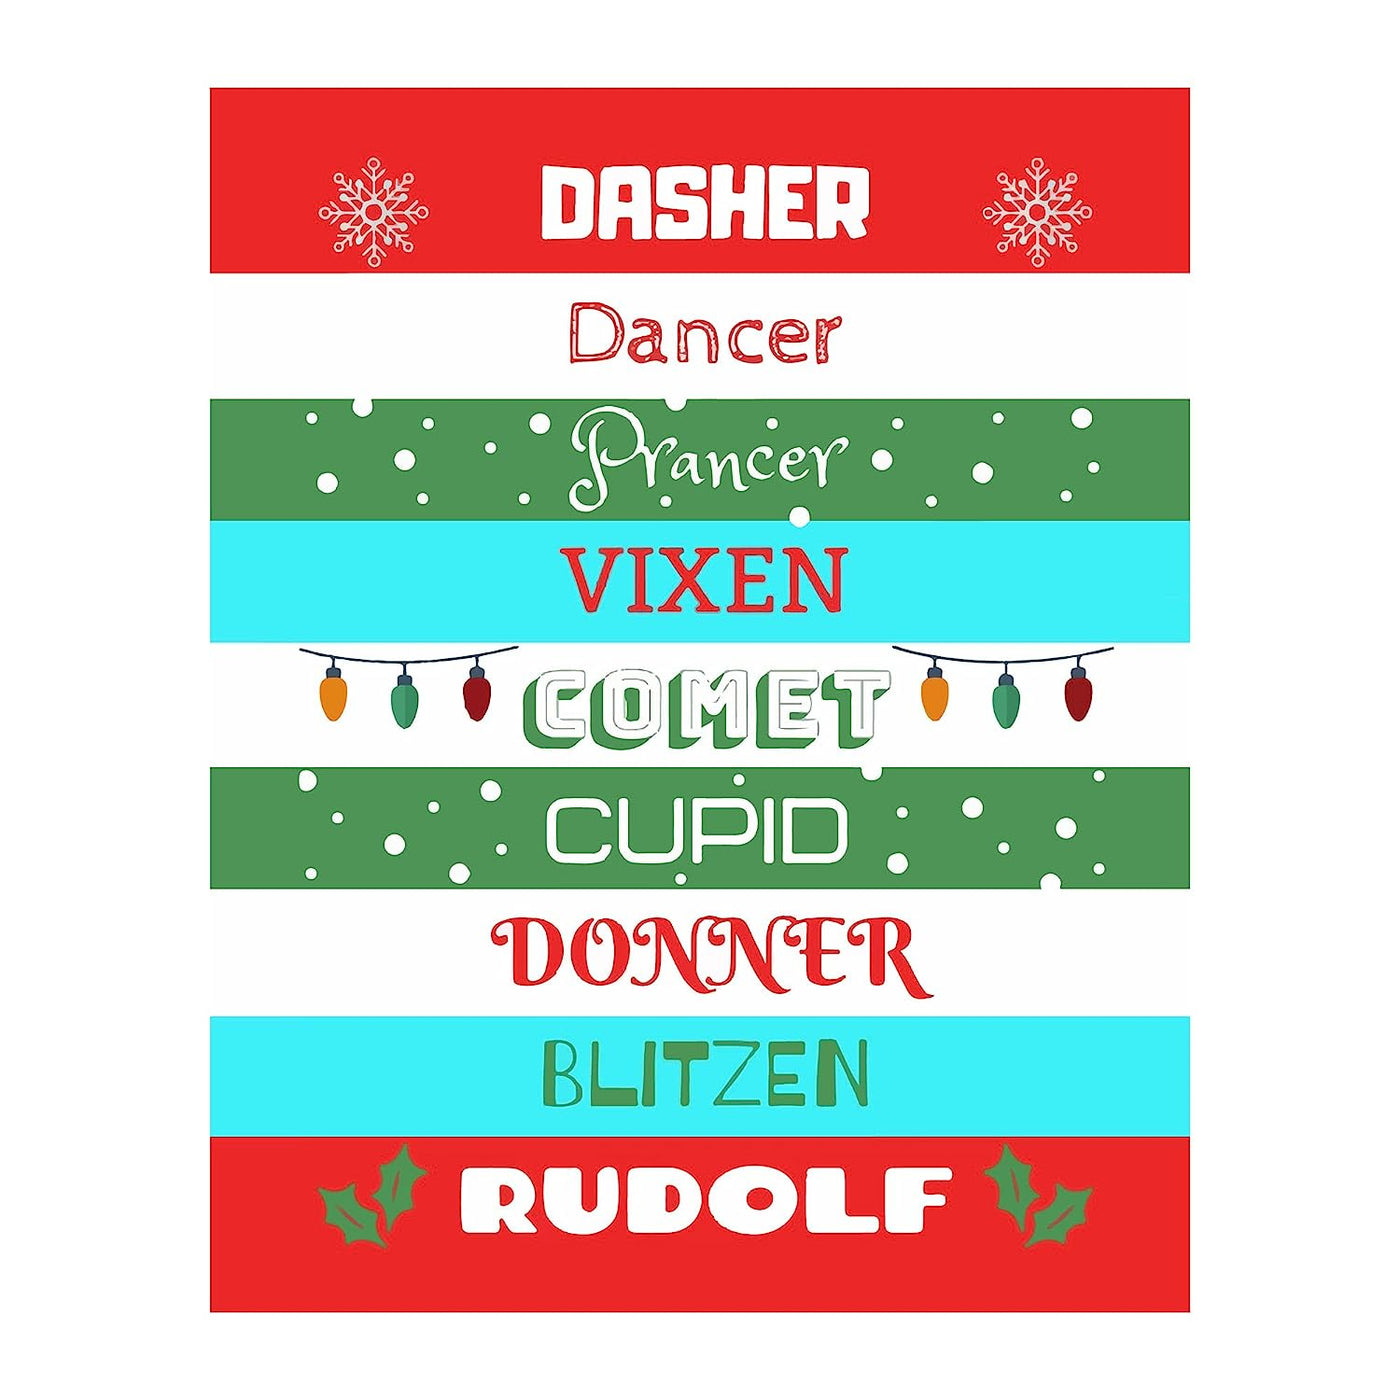 Dasher-Dancer-Prancer-Vixon Christmas Songs Wall Sign -11 x 14" Fun Holiday Art Print -Ready to Frame. Musical Home-Welcome-Kitchen-Farmhouse-Christian Decor. Festive Decoration and Great Gift!